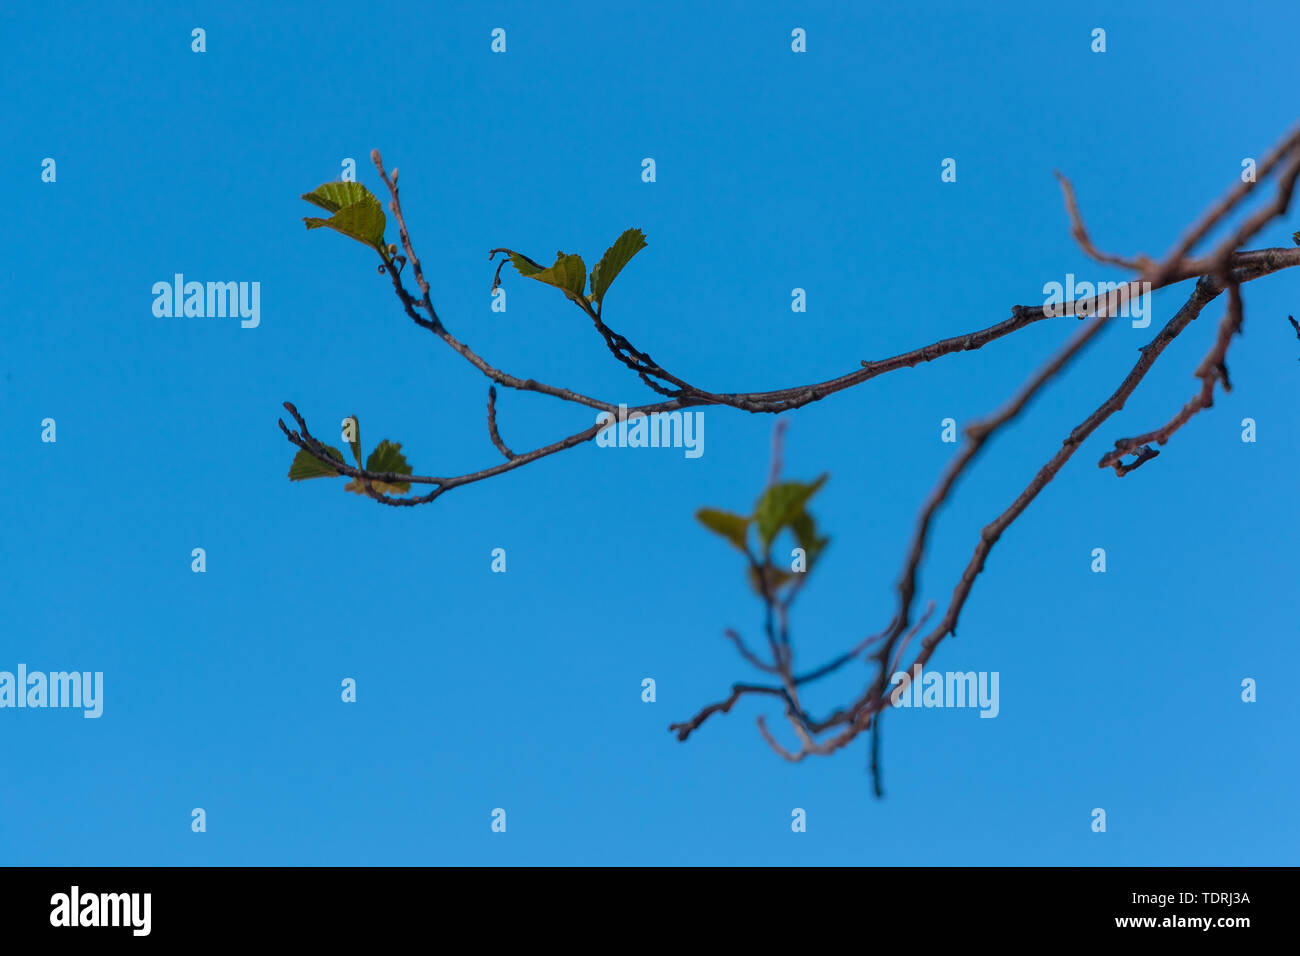 branch of a tree with flowering leaves Stock Photo